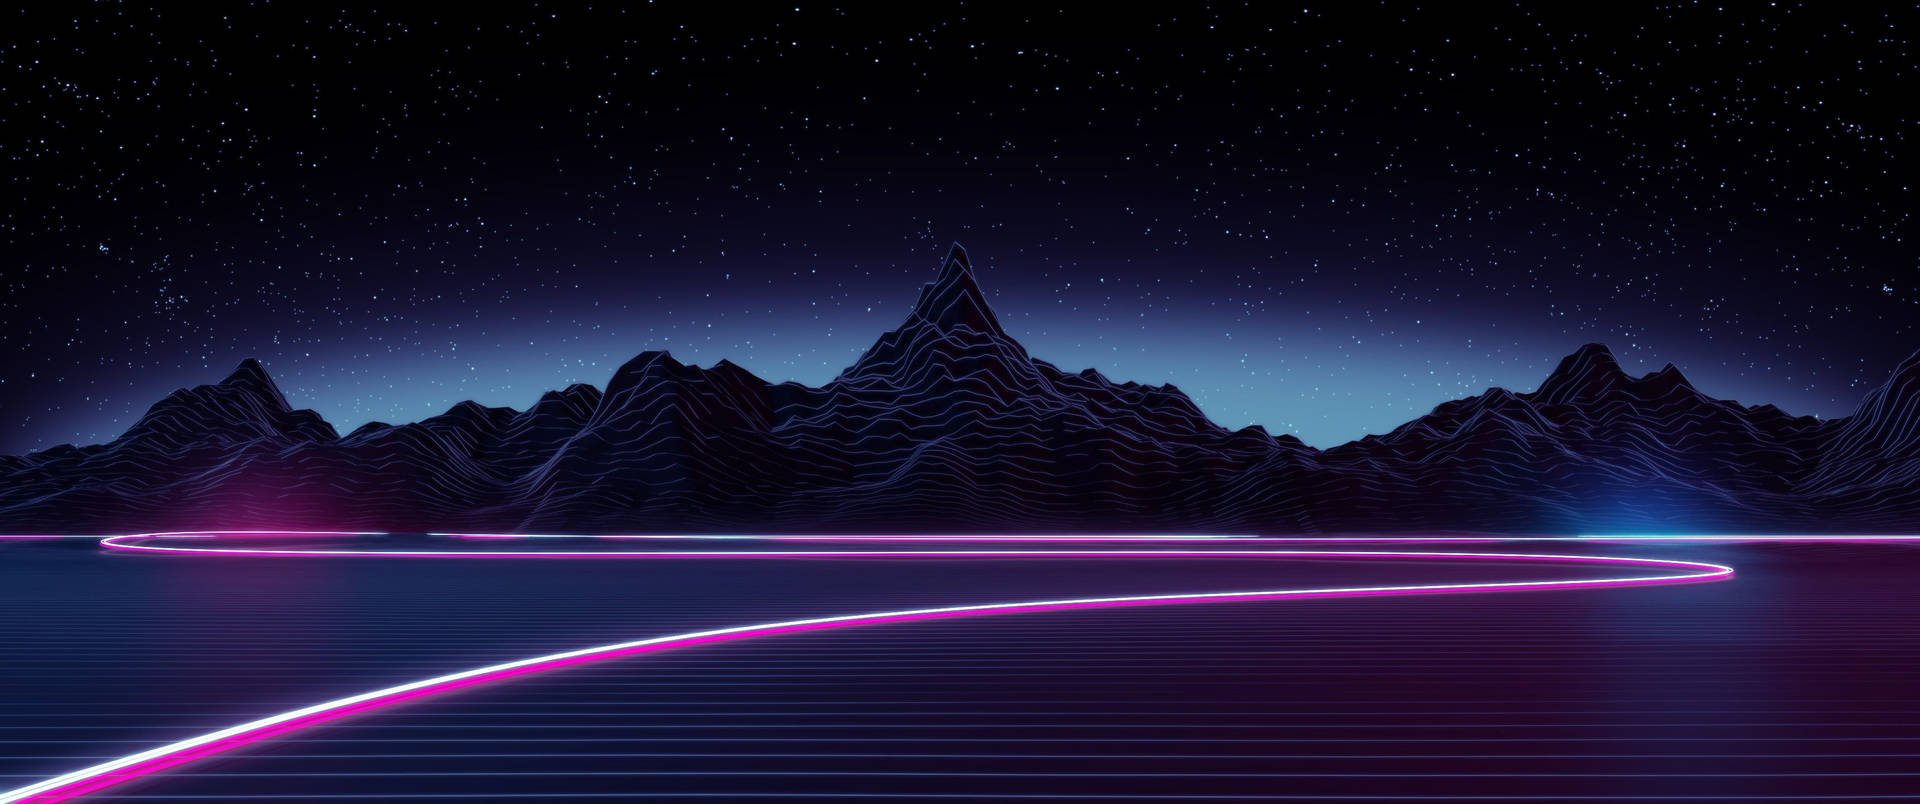 Celebrate the nostalgia of the 80s with a classic retro look Wallpaper